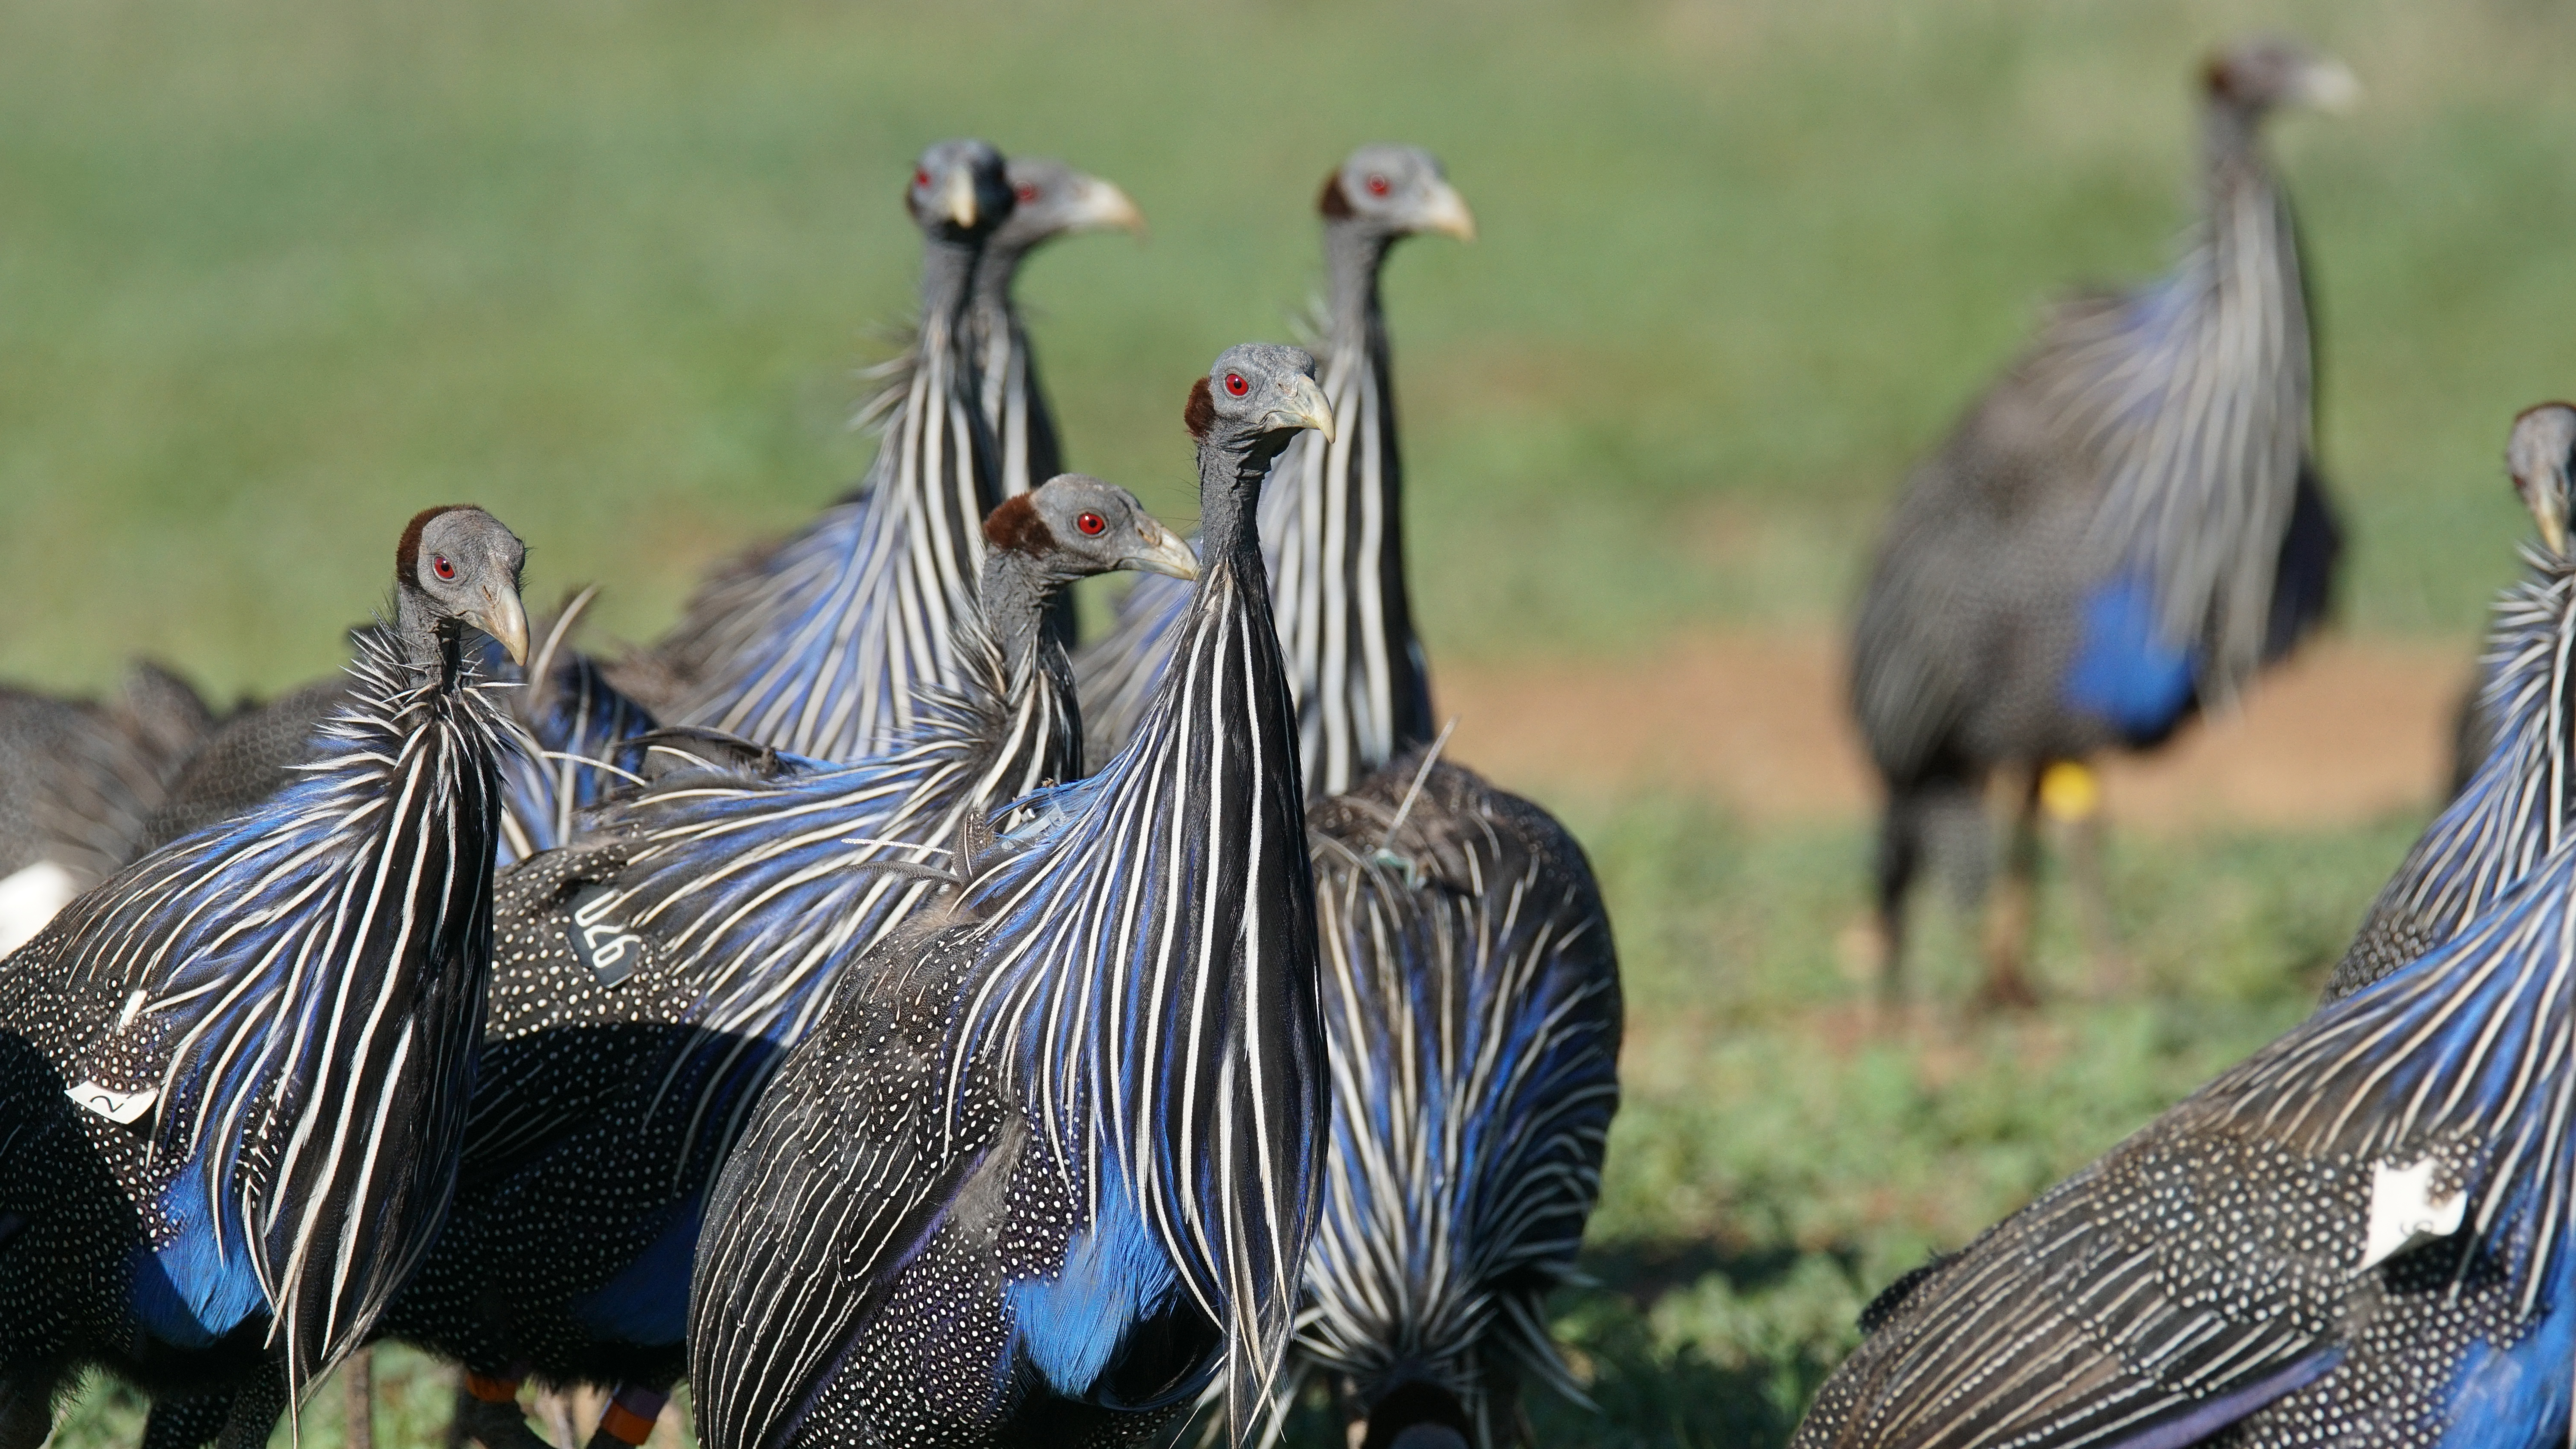 Vulturine guineafowl move in highly cohesive groups. This cohesion allows them to coordinate their actions as they move together through the landscape, and therefore maintain stable group membership over extensive periods of time. Image credit: James Klarevas 